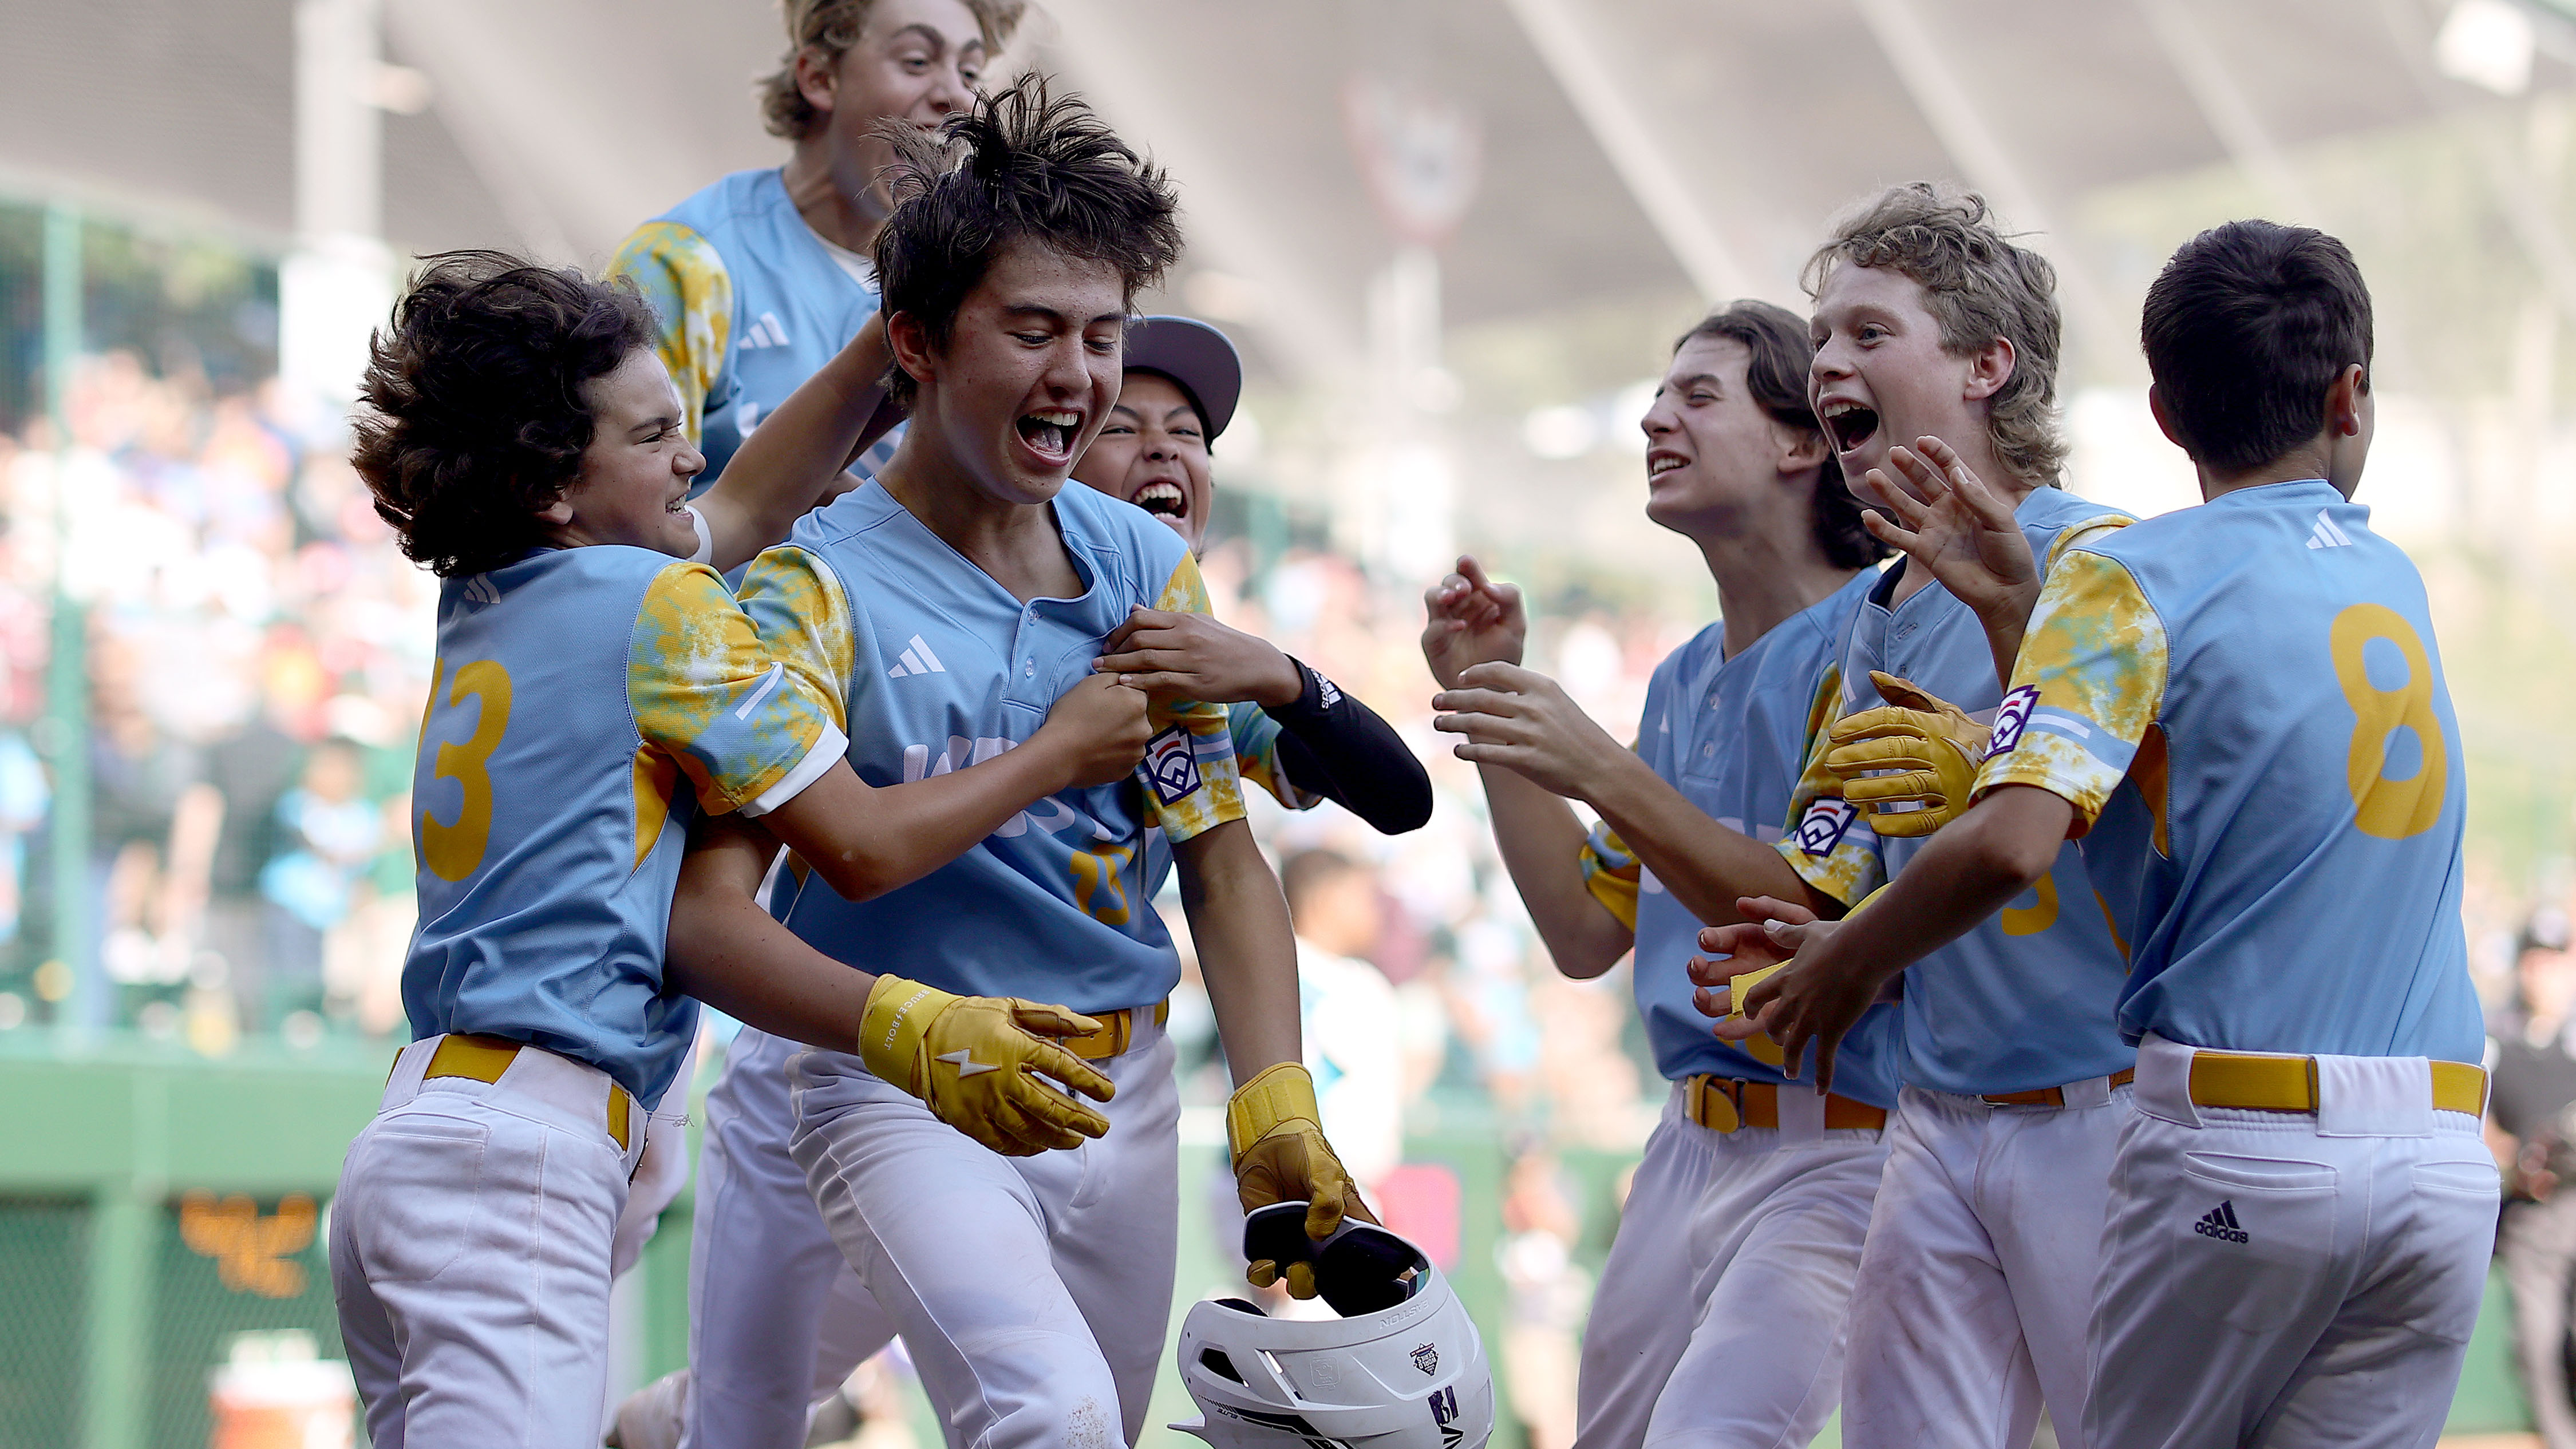 How El Segundo will welcome home the Little League champions